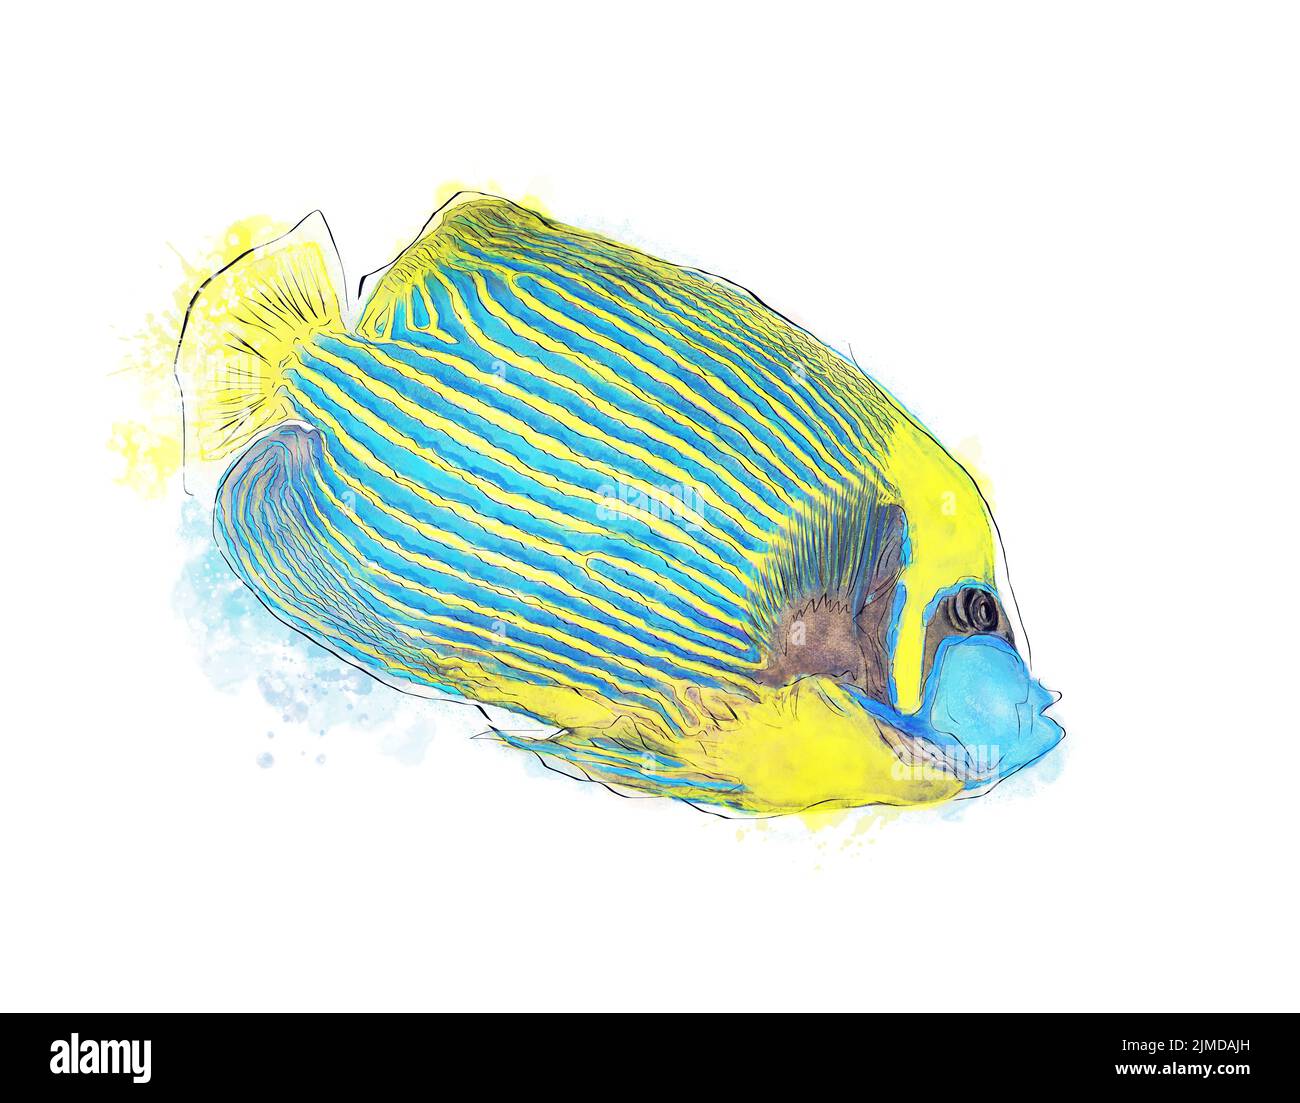 Emperor Angelfish Watercolor Image on White Background. Colorful tropical Fish. Stock Photo